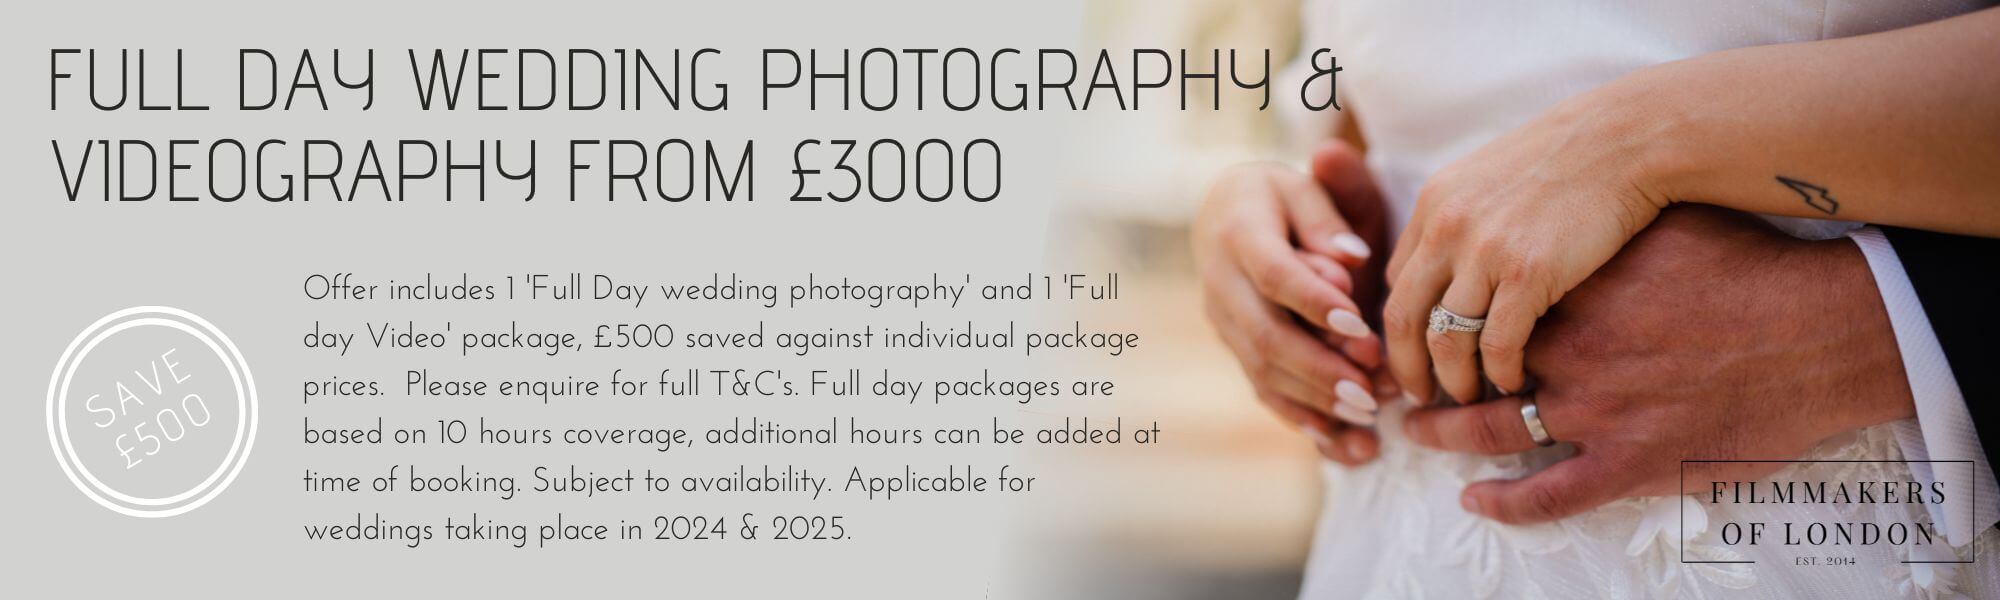 wedding video and photo package deal